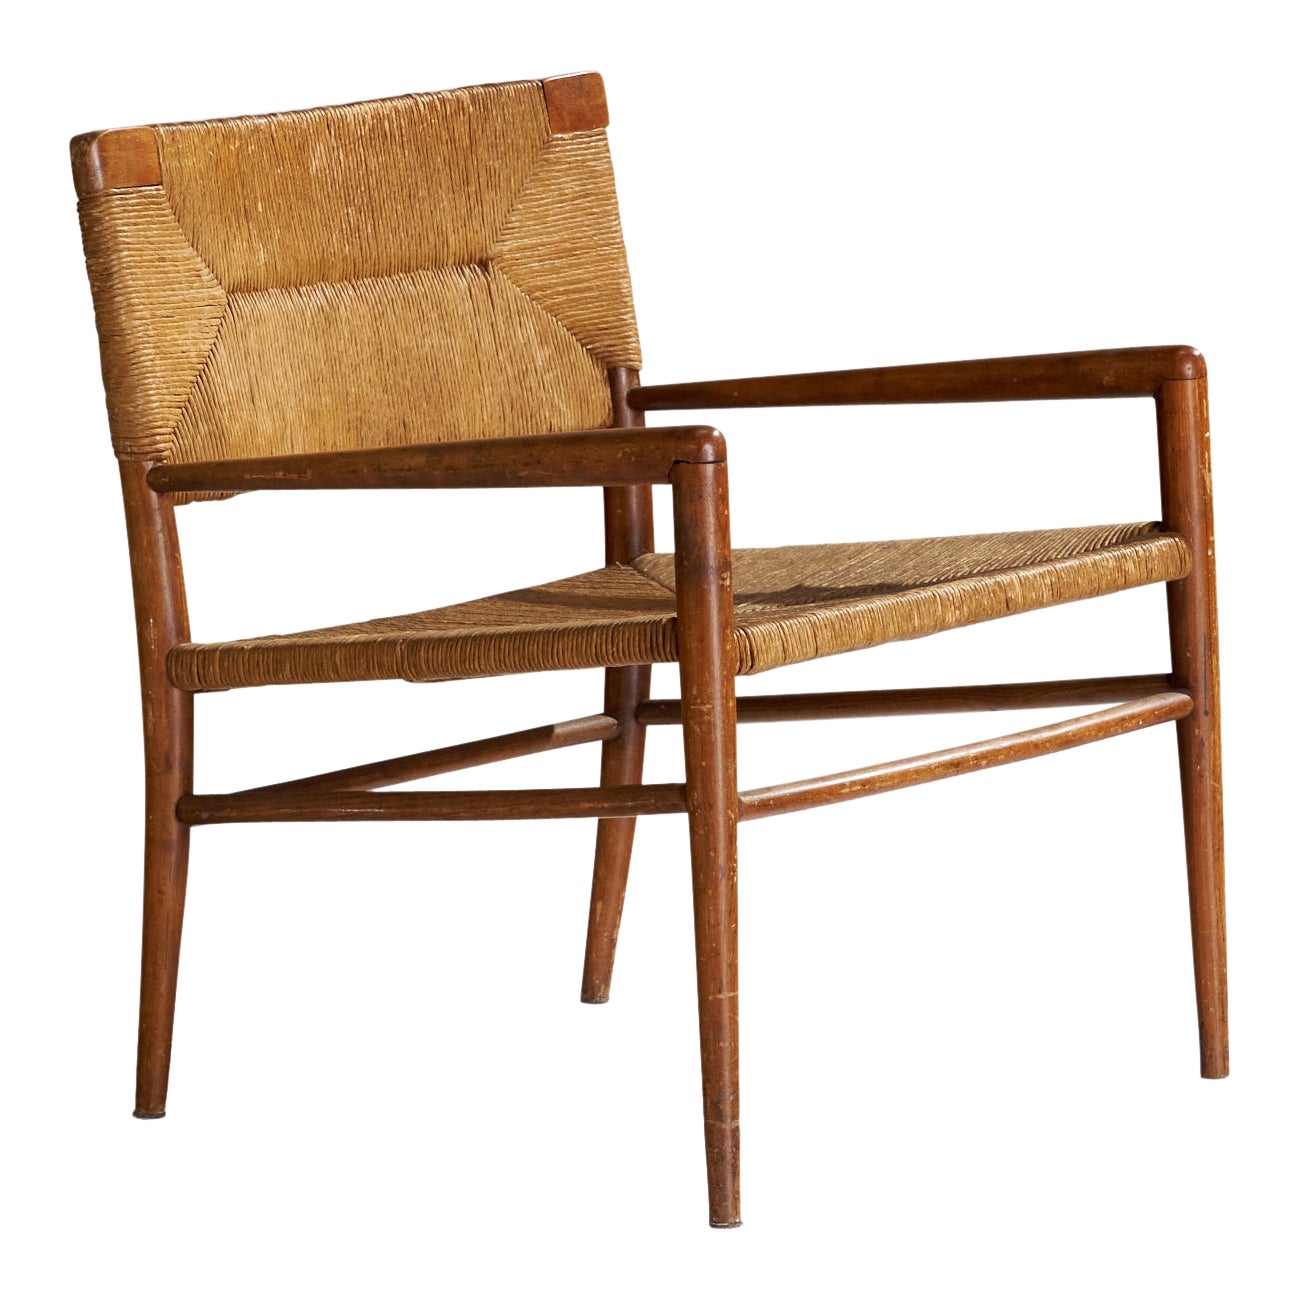 Mel Smilow, Lounge Chair, Wood, Papercord, USA, 1955 For Sale